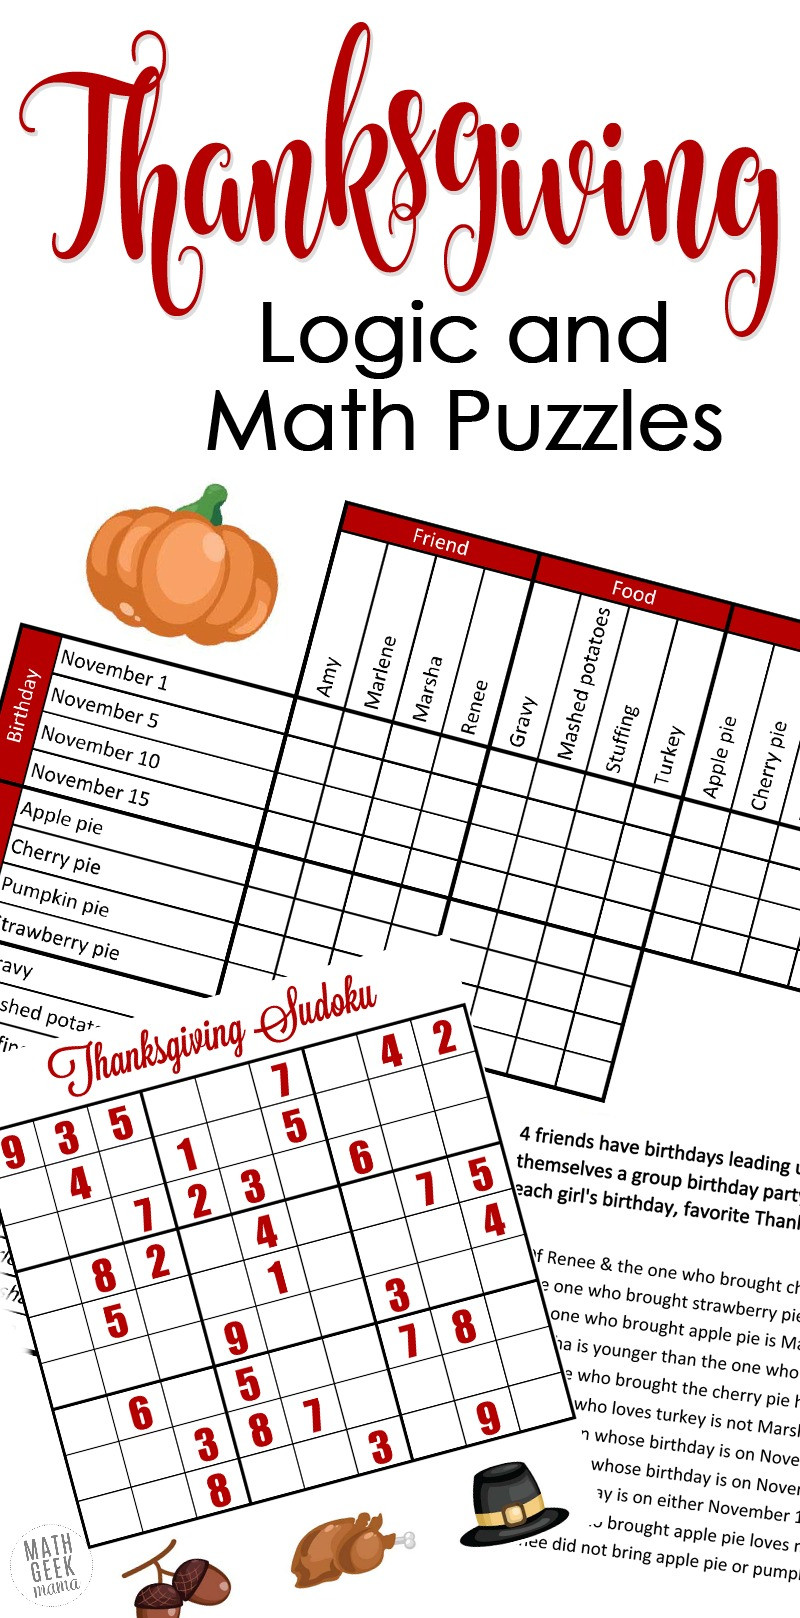 Middle School Math Puzzles Printable Free Fun Thanksgiving Math Puzzles for Older Kids